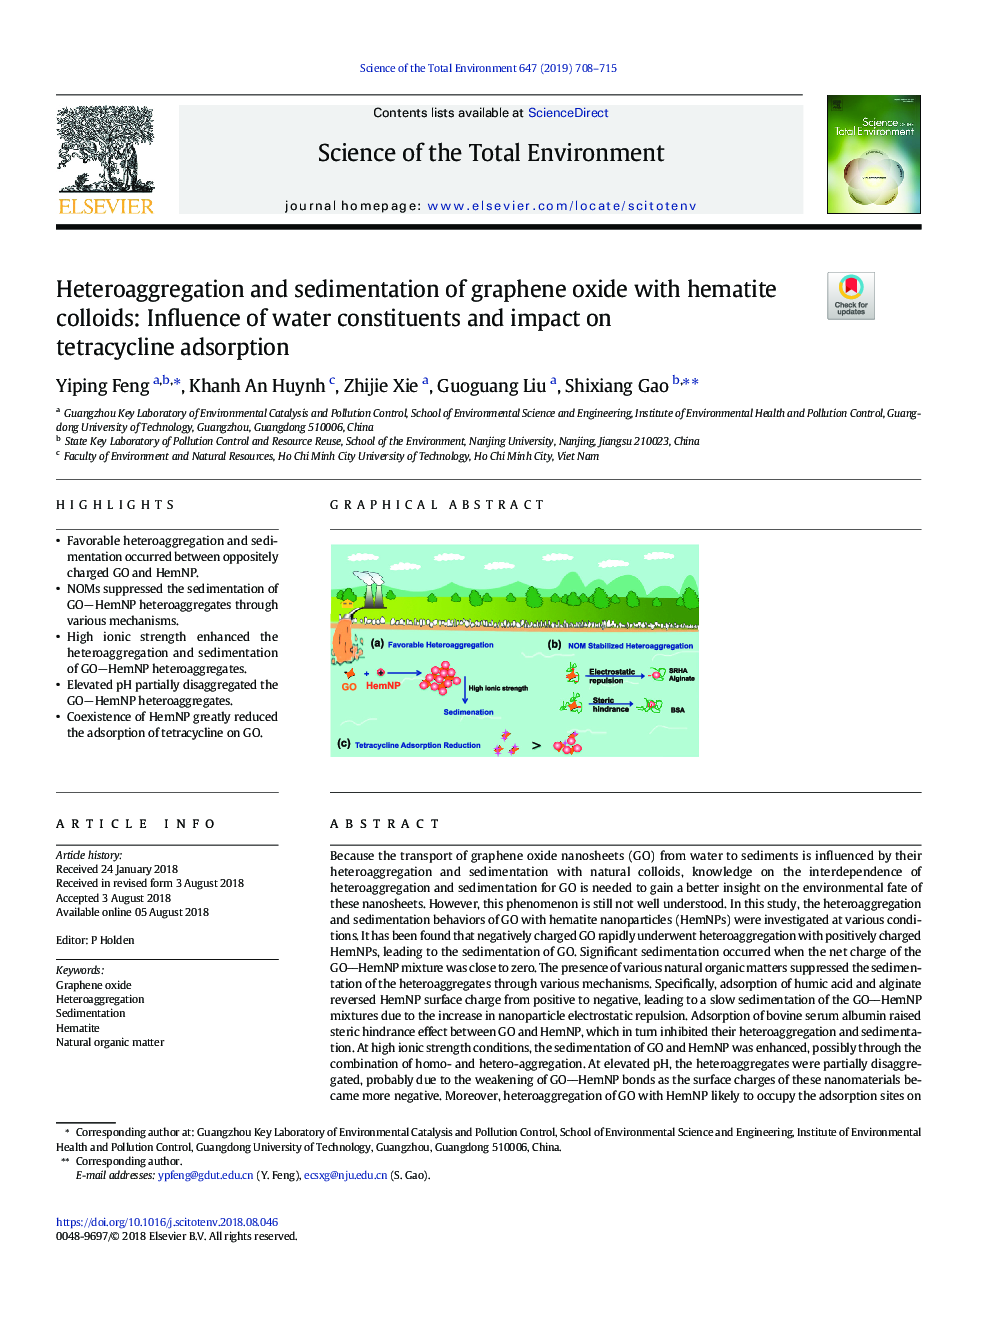 Heteroaggregation and sedimentation of graphene oxide with hematite colloids: Influence of water constituents and impact on tetracycline adsorption